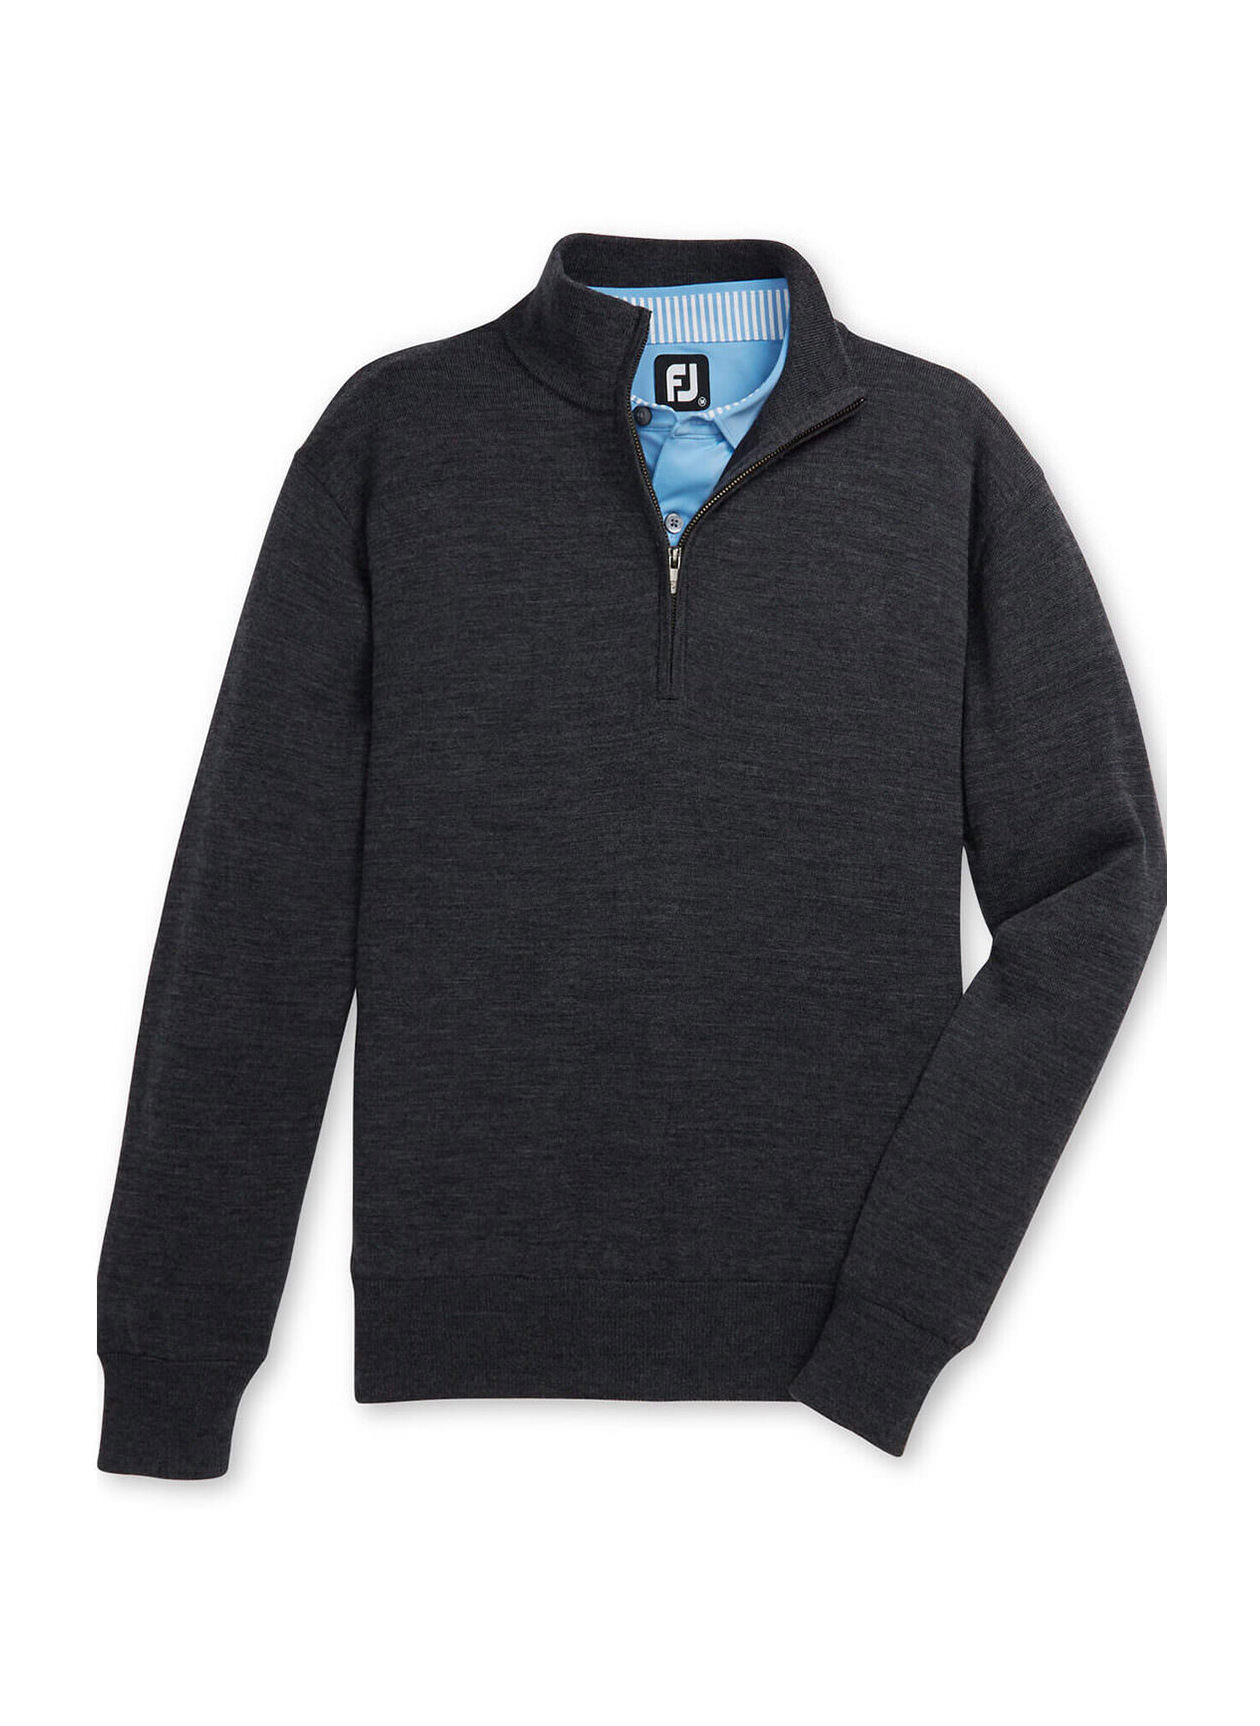 Footjoy Golf Sweaters Outlet | www.puritanaudiolabs.com